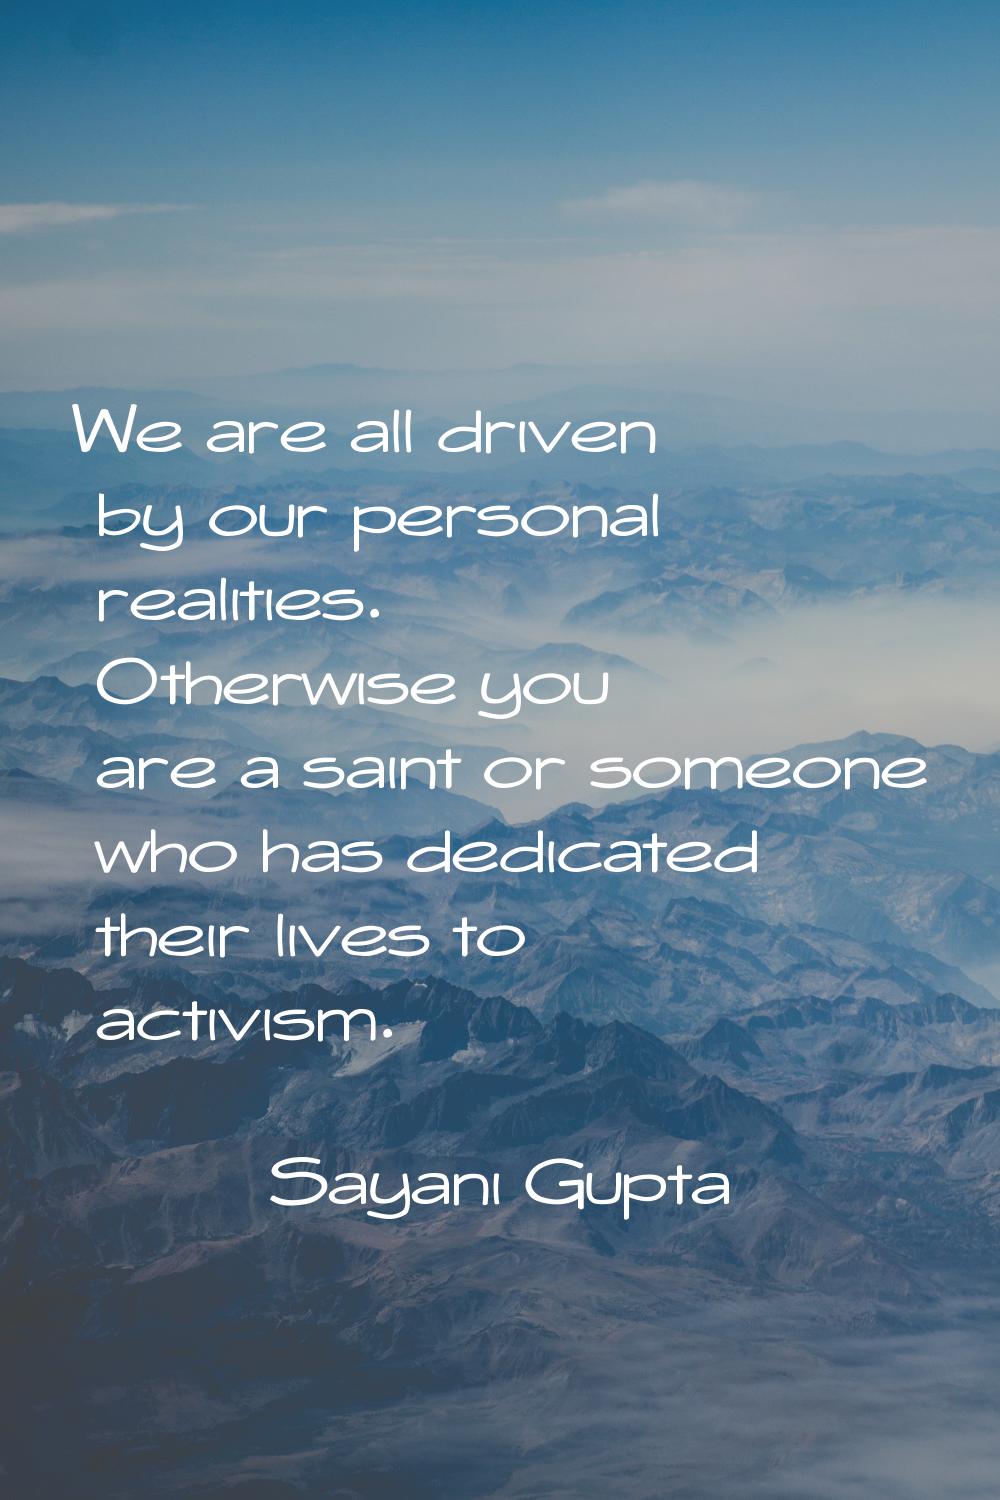 We are all driven by our personal realities. Otherwise you are a saint or someone who has dedicated